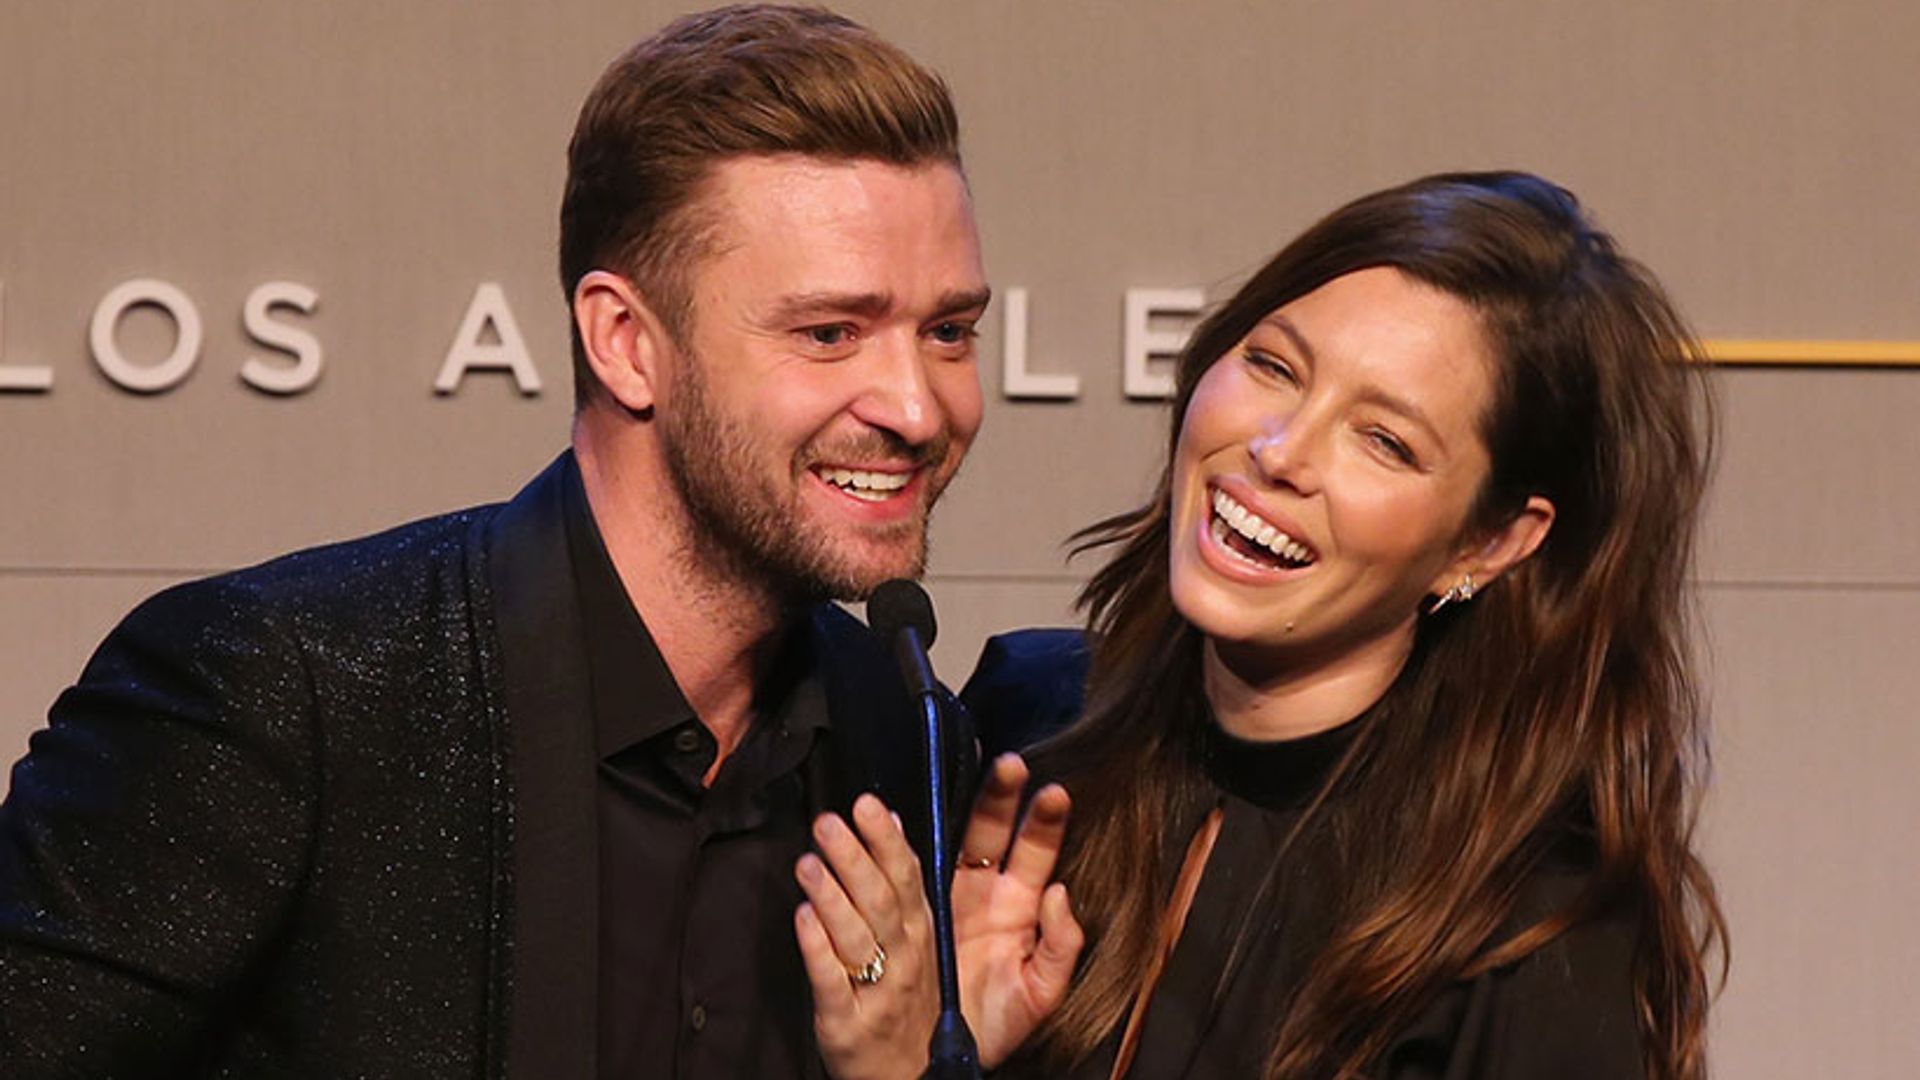 Find out what happened when Justin Timberlake and Jessica Biel first met